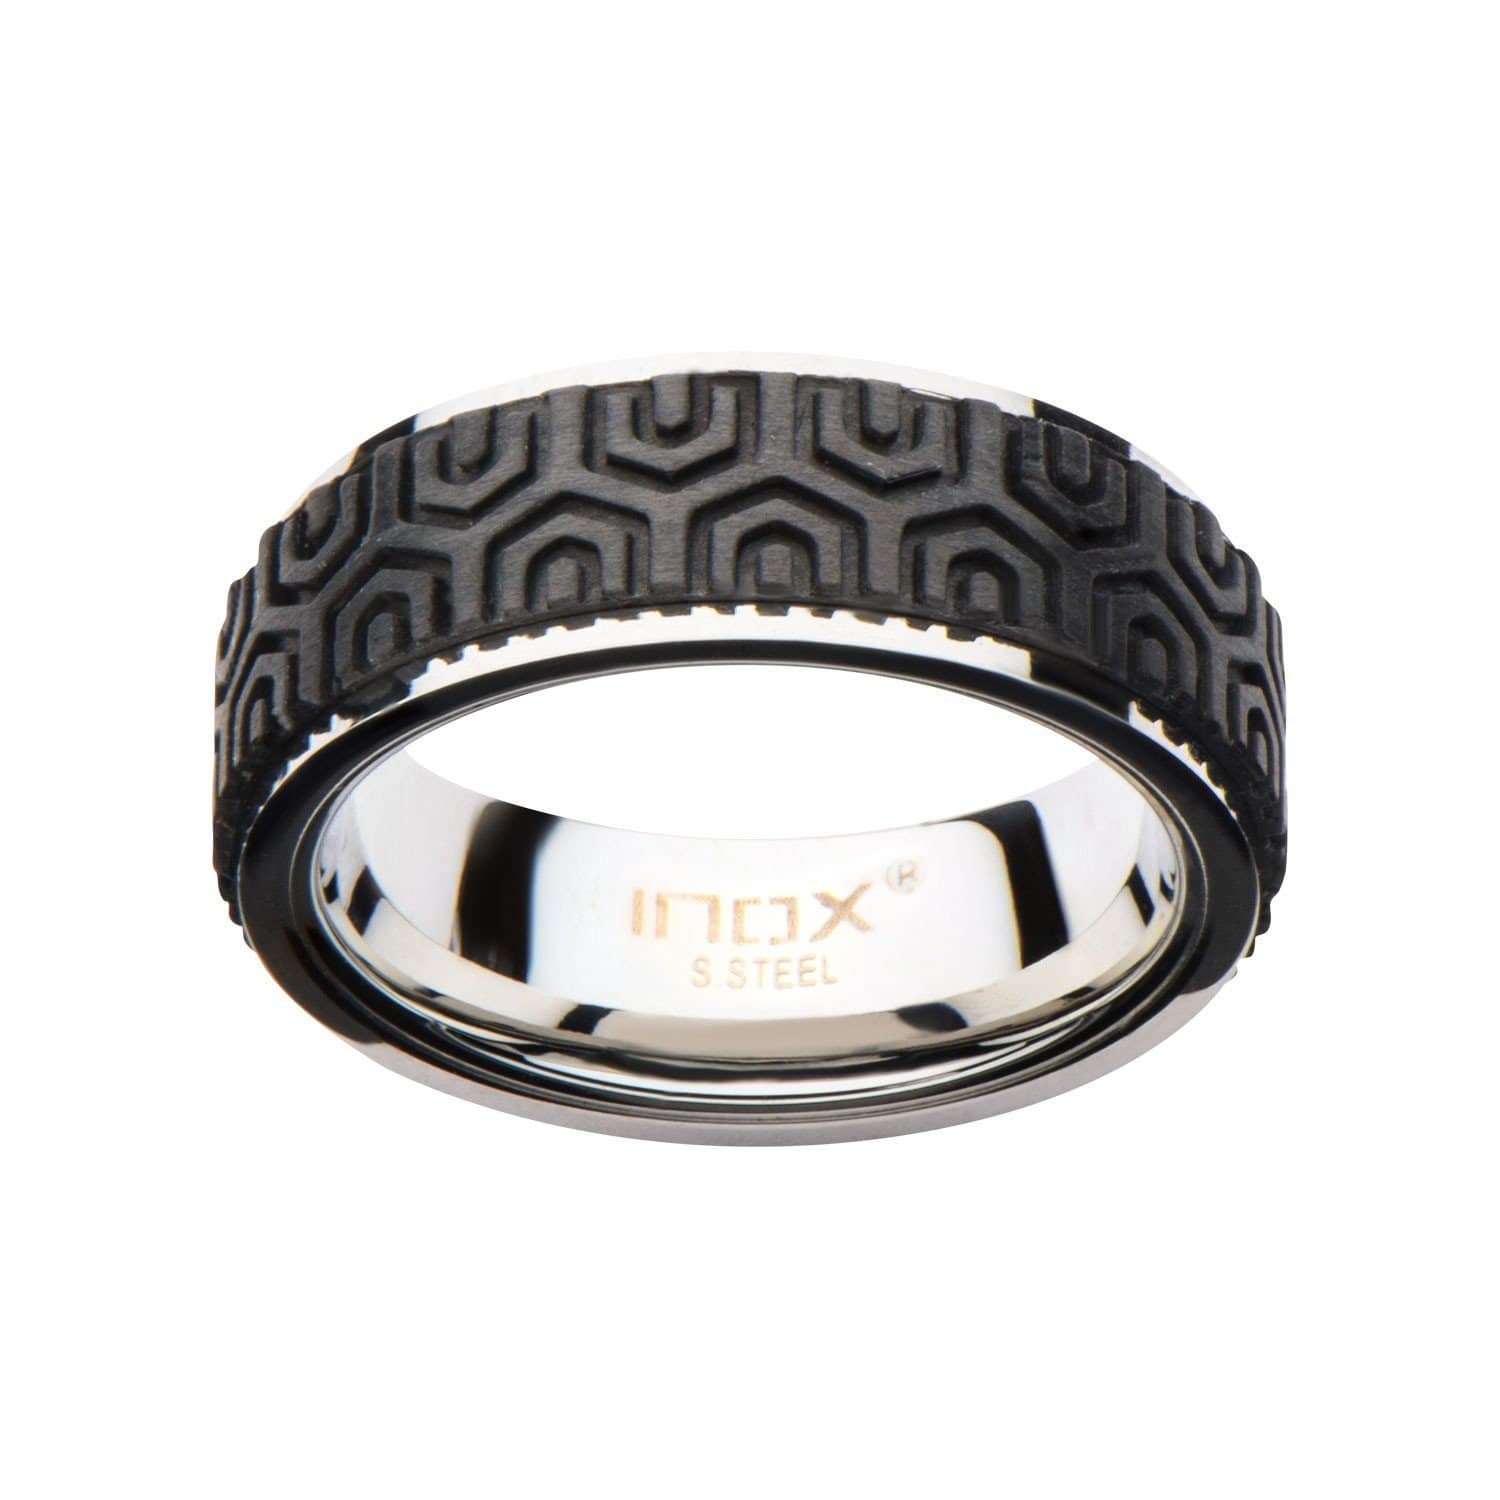 INOX JEWELRY Rings Silver Tone Stainless Steel Treated Solid Carbon Fiber Geometrical Pattern Band FR16R4